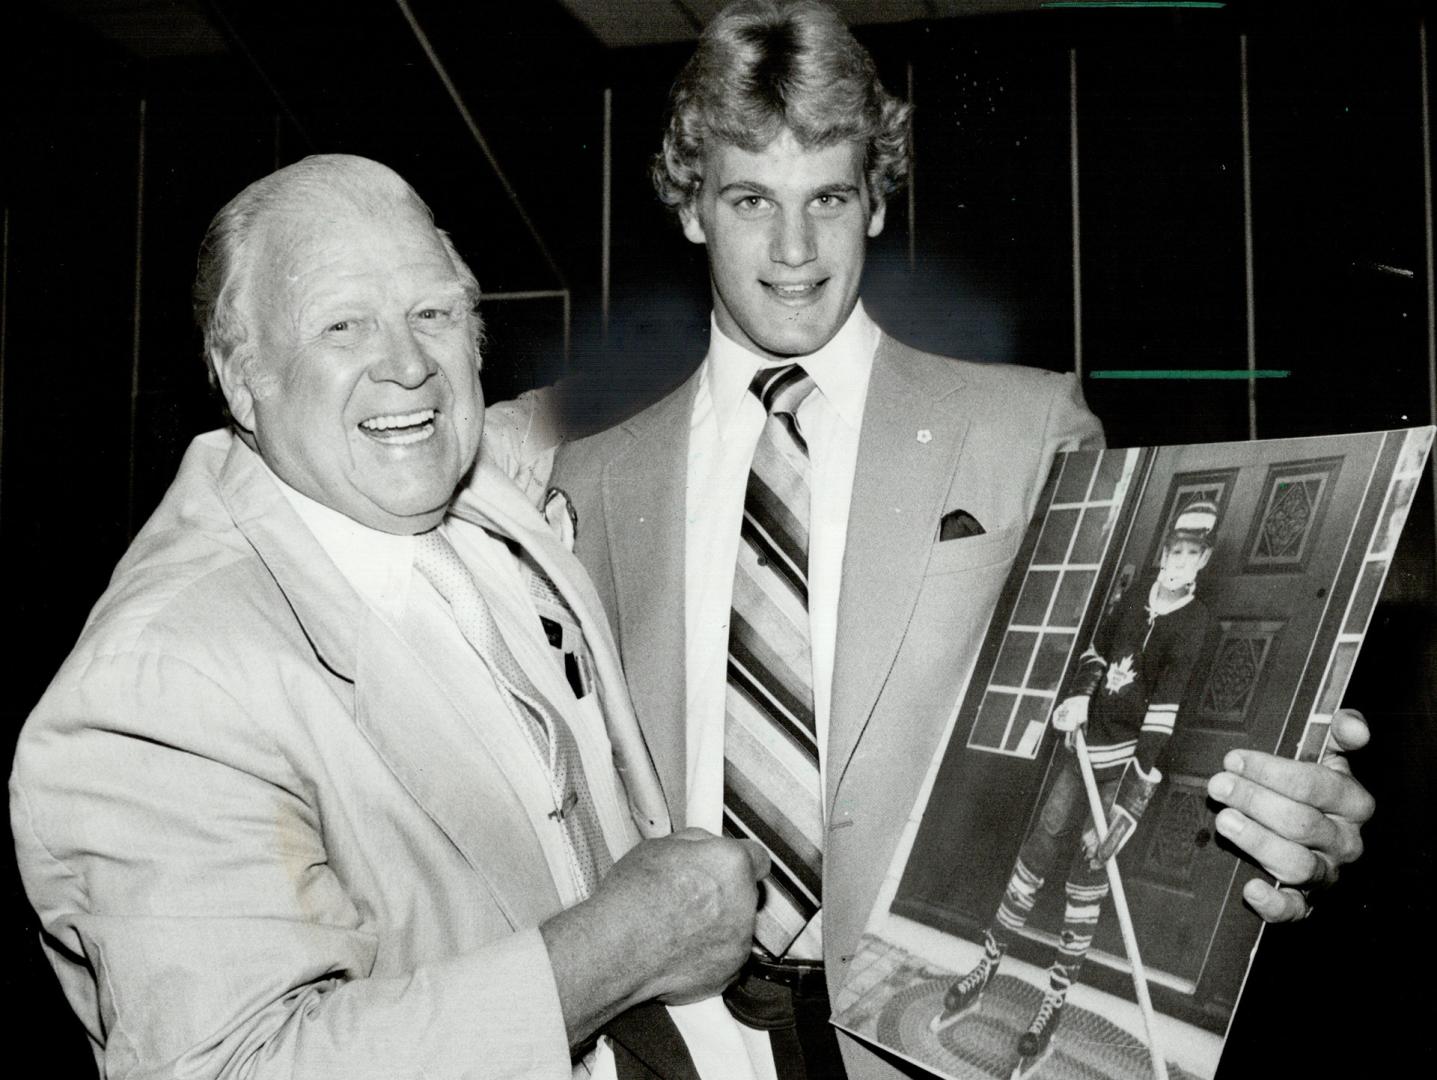 Ambition realized, Harold Ballard, owner of the Toronto Maple Leafs, welcomes defenceman Gary Nylund yesterday